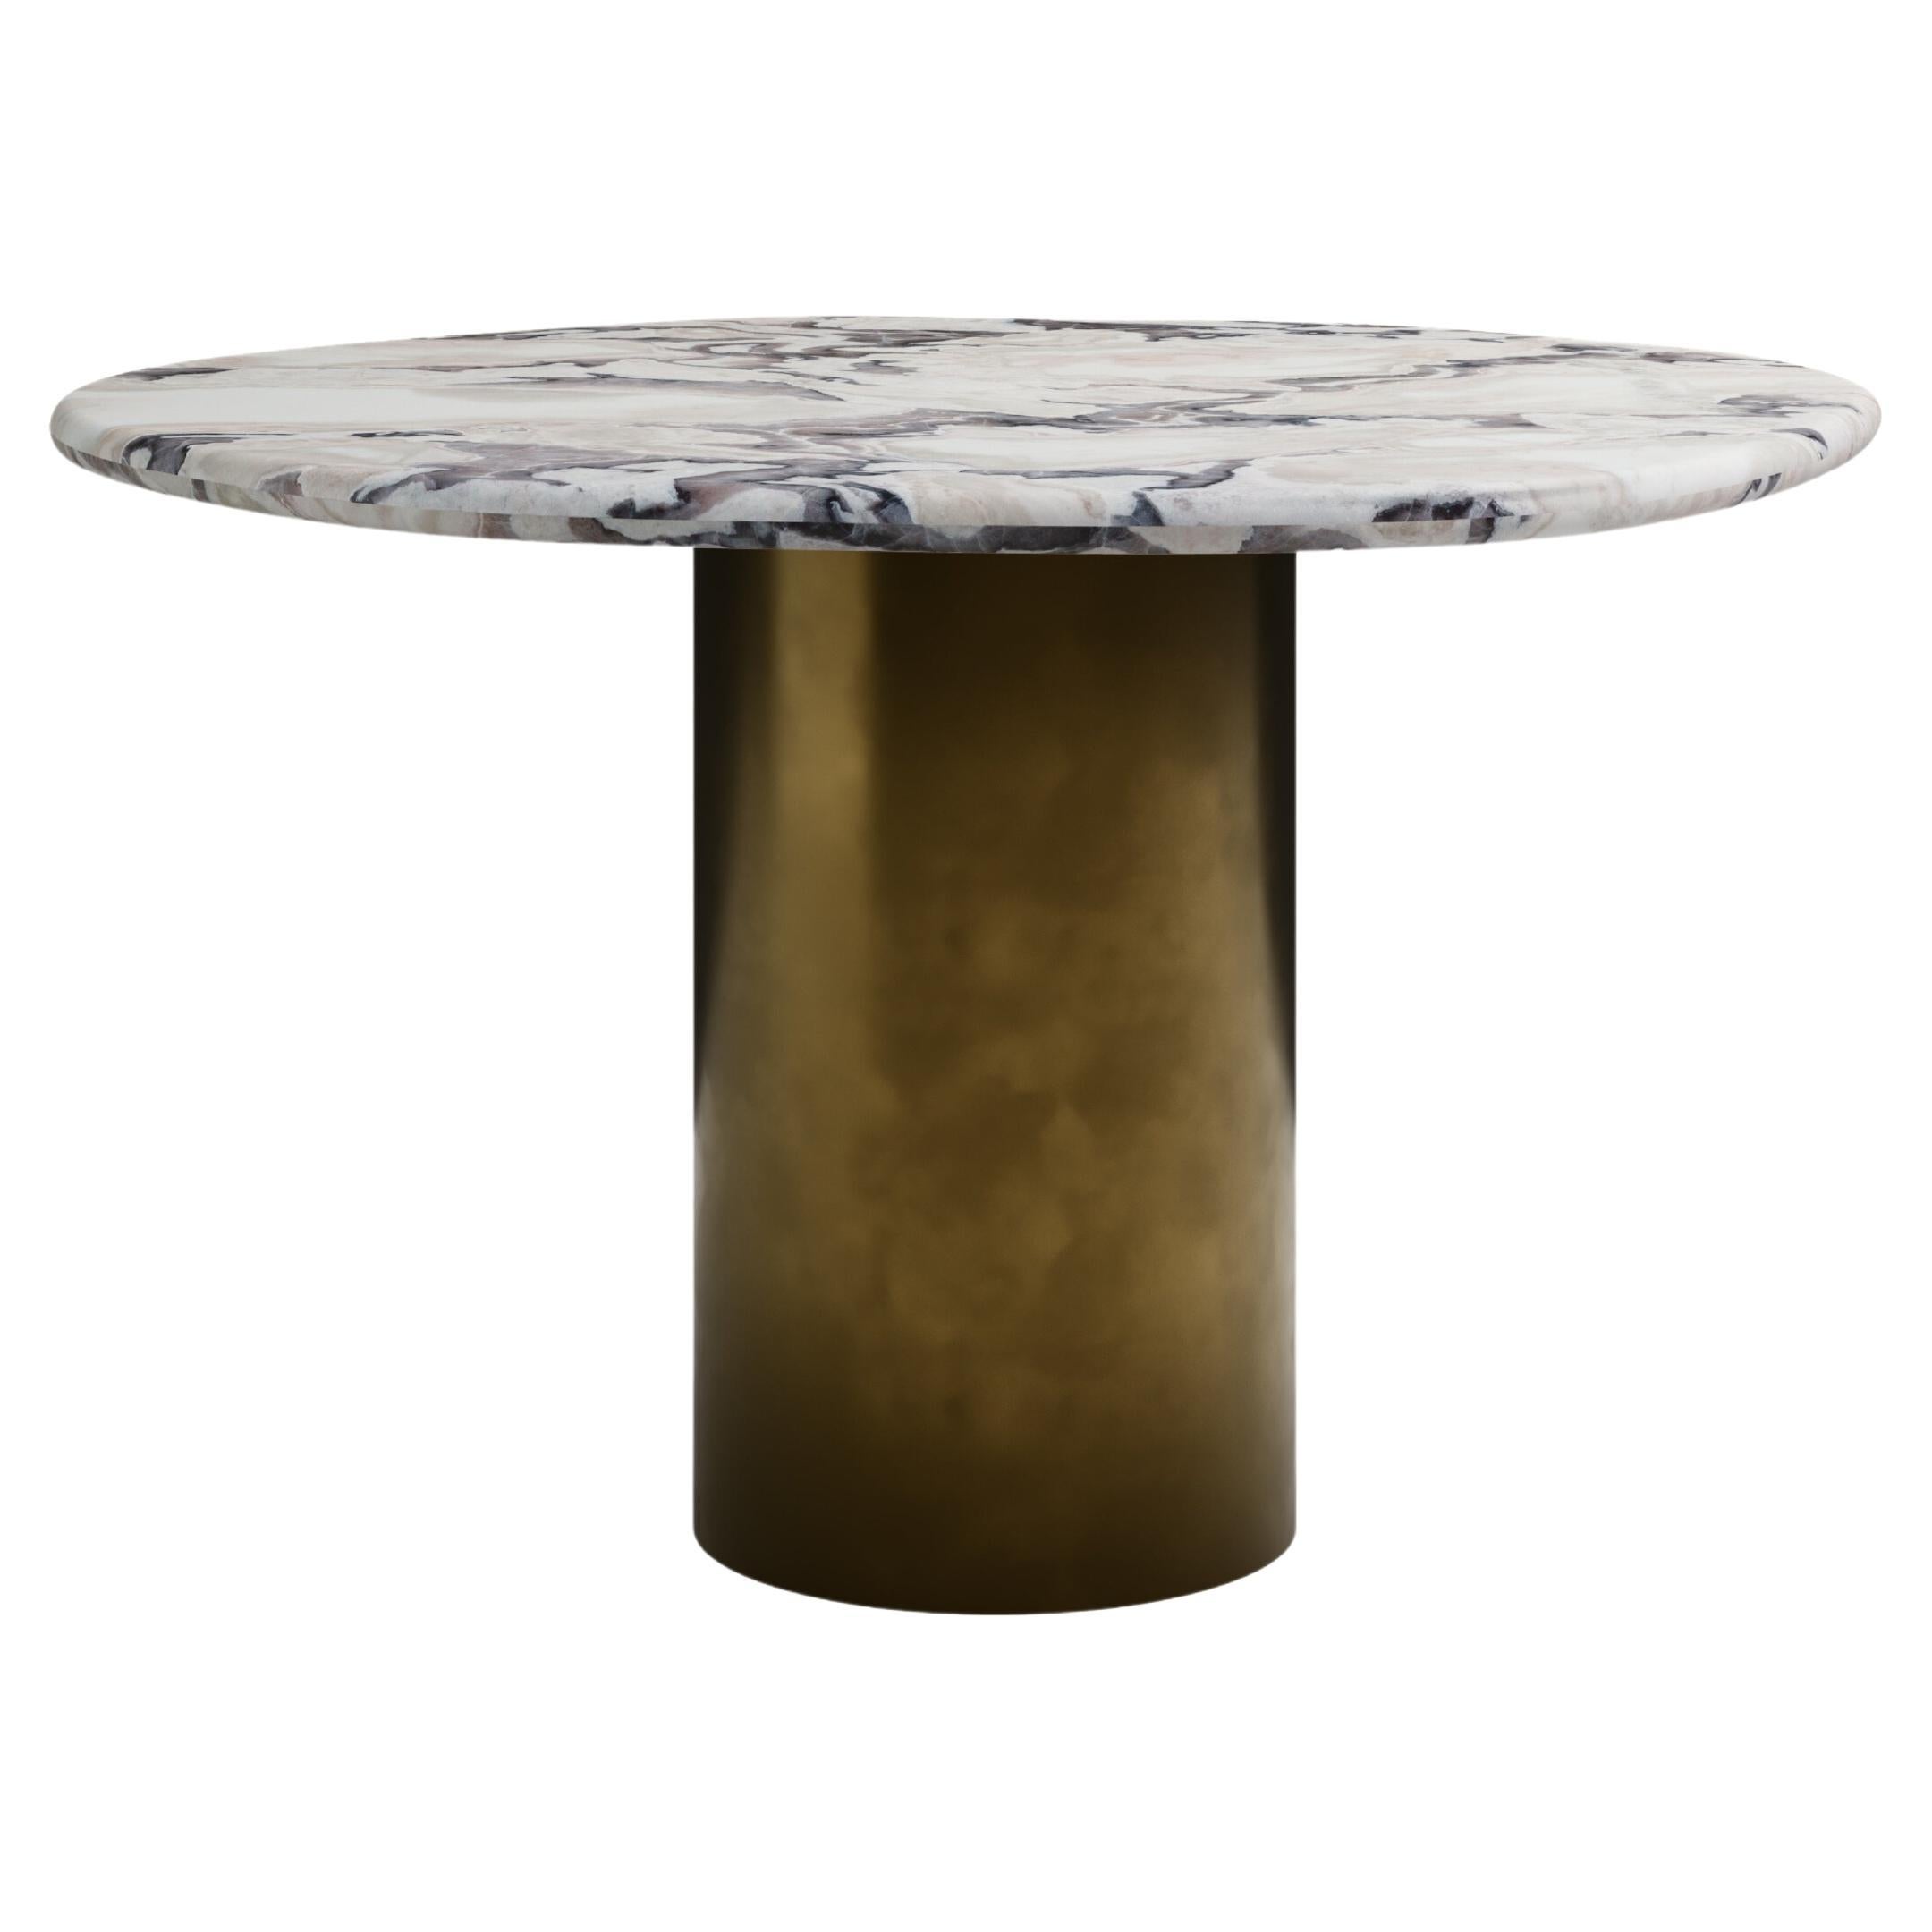 FORM(LA) Lago Round Dining Table 36”L x 36”W x 30”H Oyster Marble & Bronze For Sale